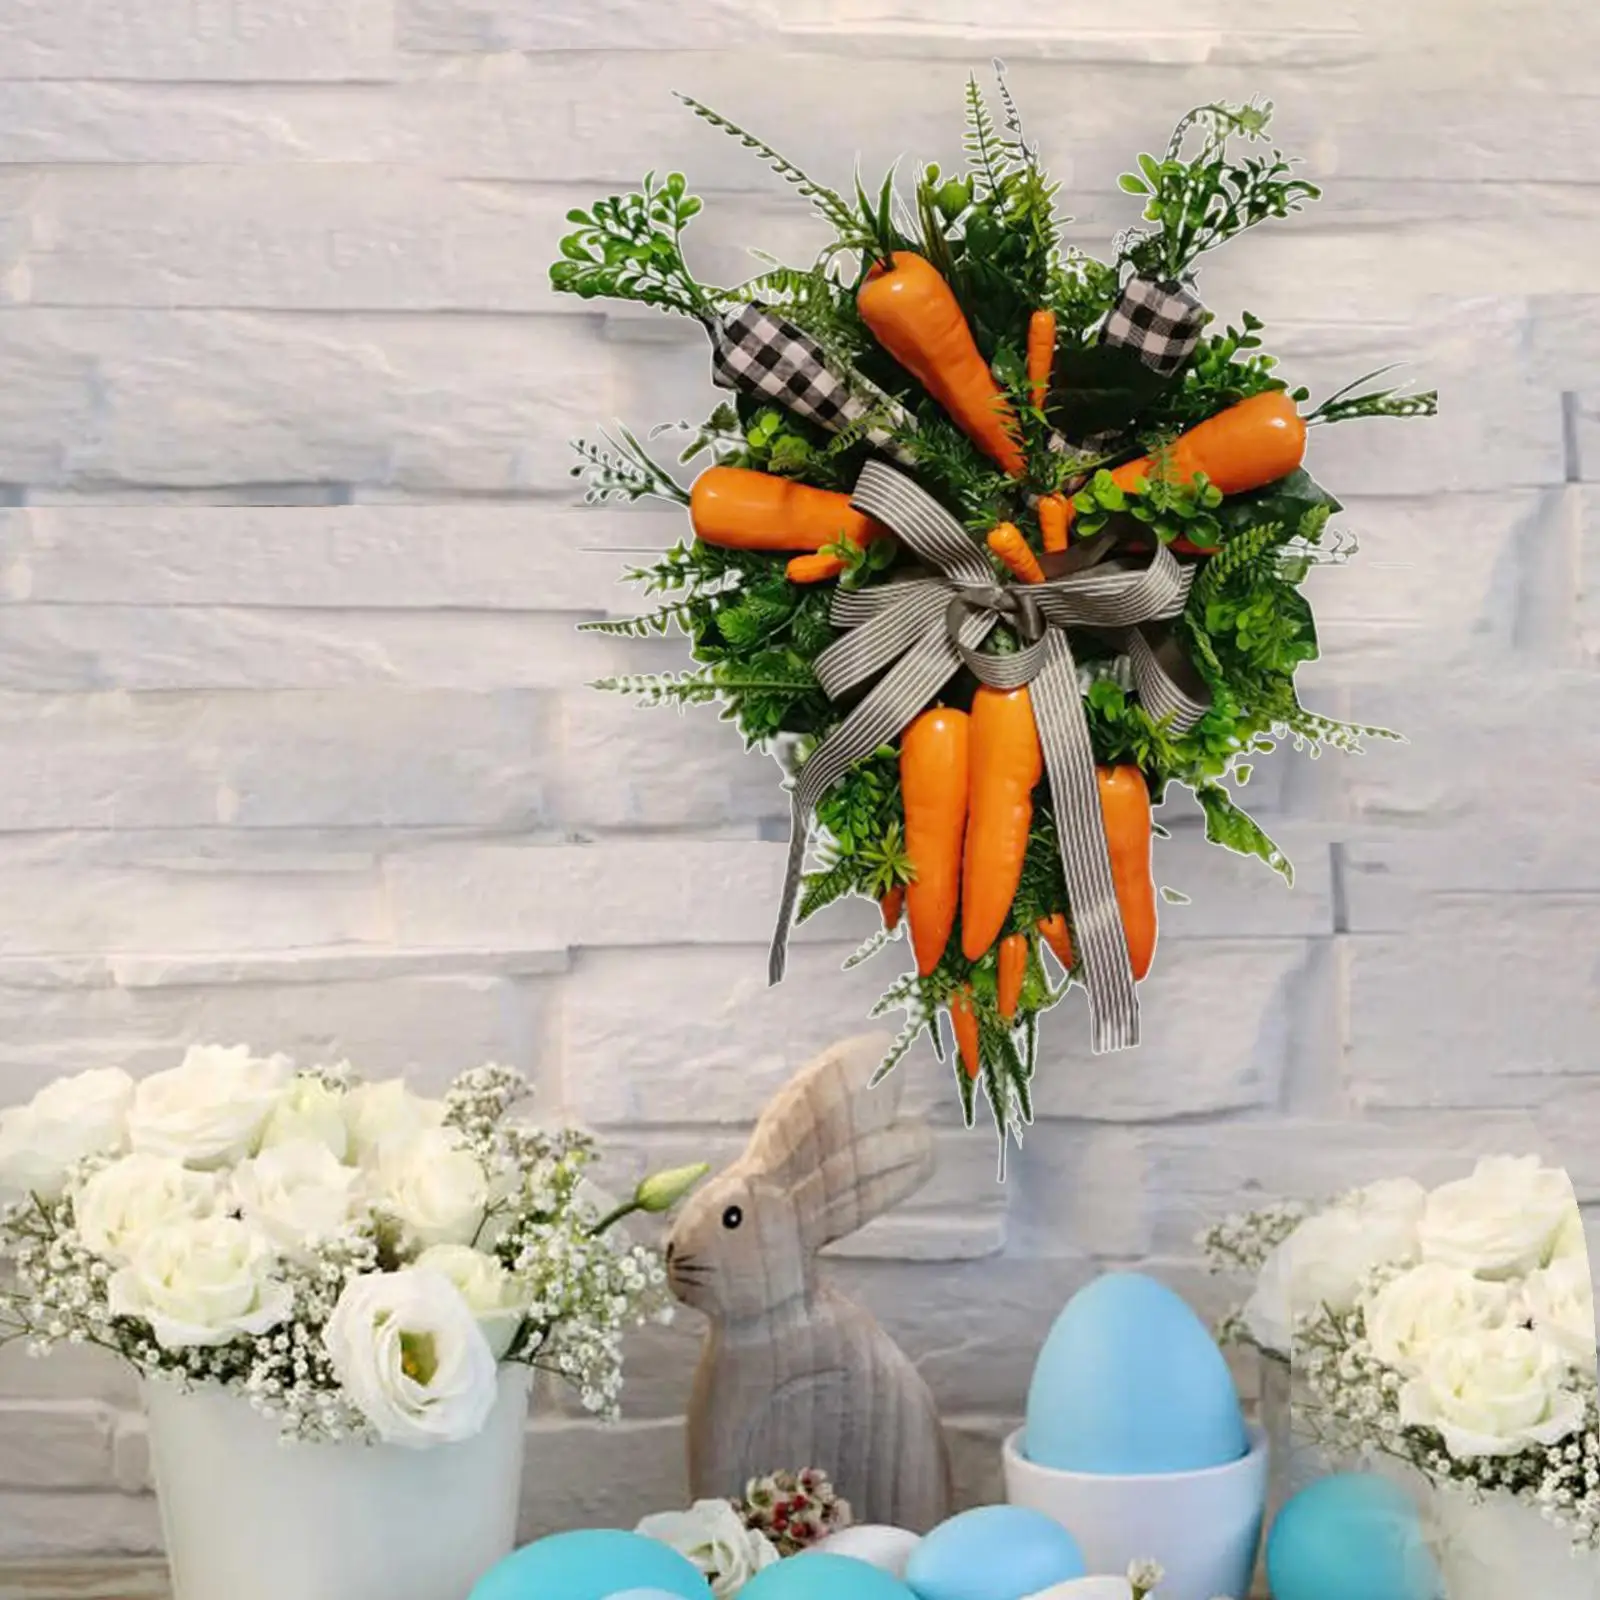  Artificial Easter Carrot Wreath Foam Carrots Wall Hanging Garland with Stripe Decor for Windows 7.5x4.3inch